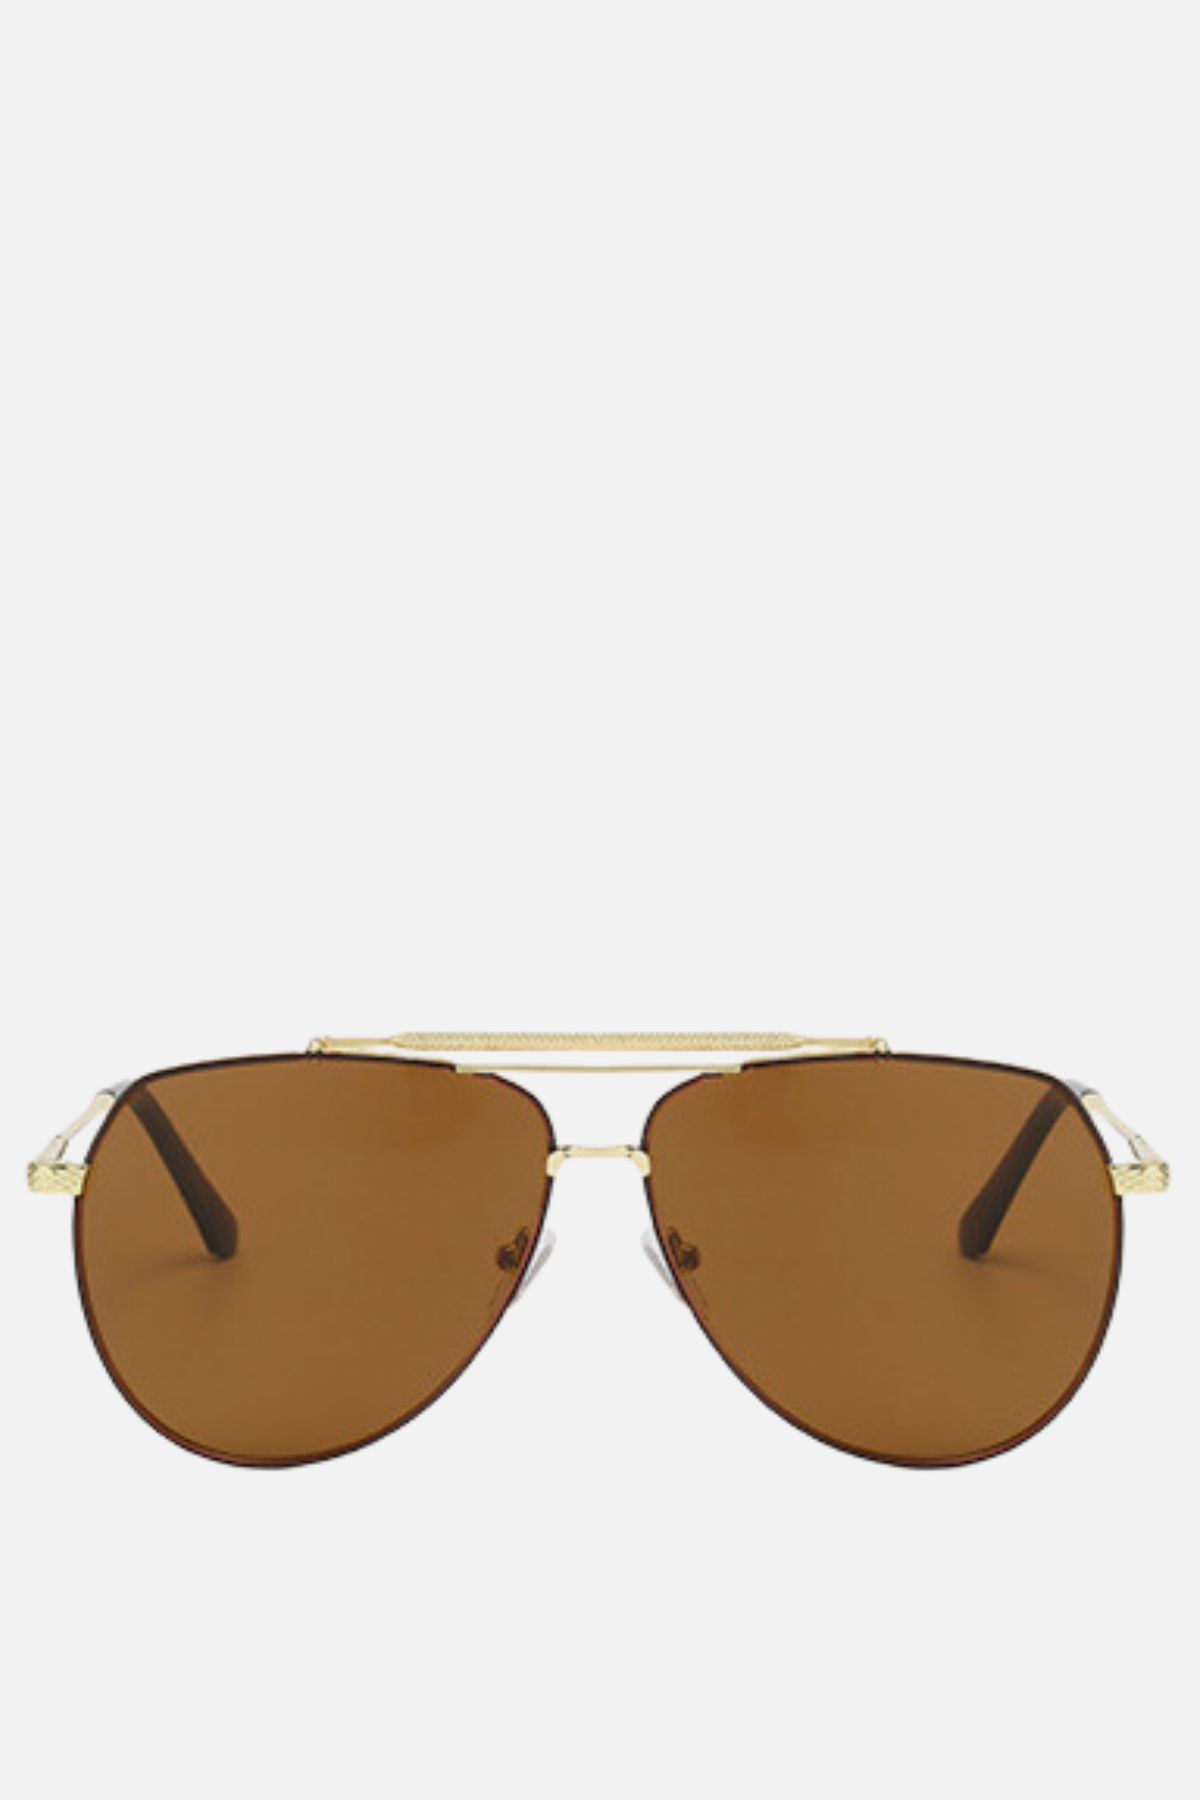 MOSCOW Brown and Gold Oversized Aviators